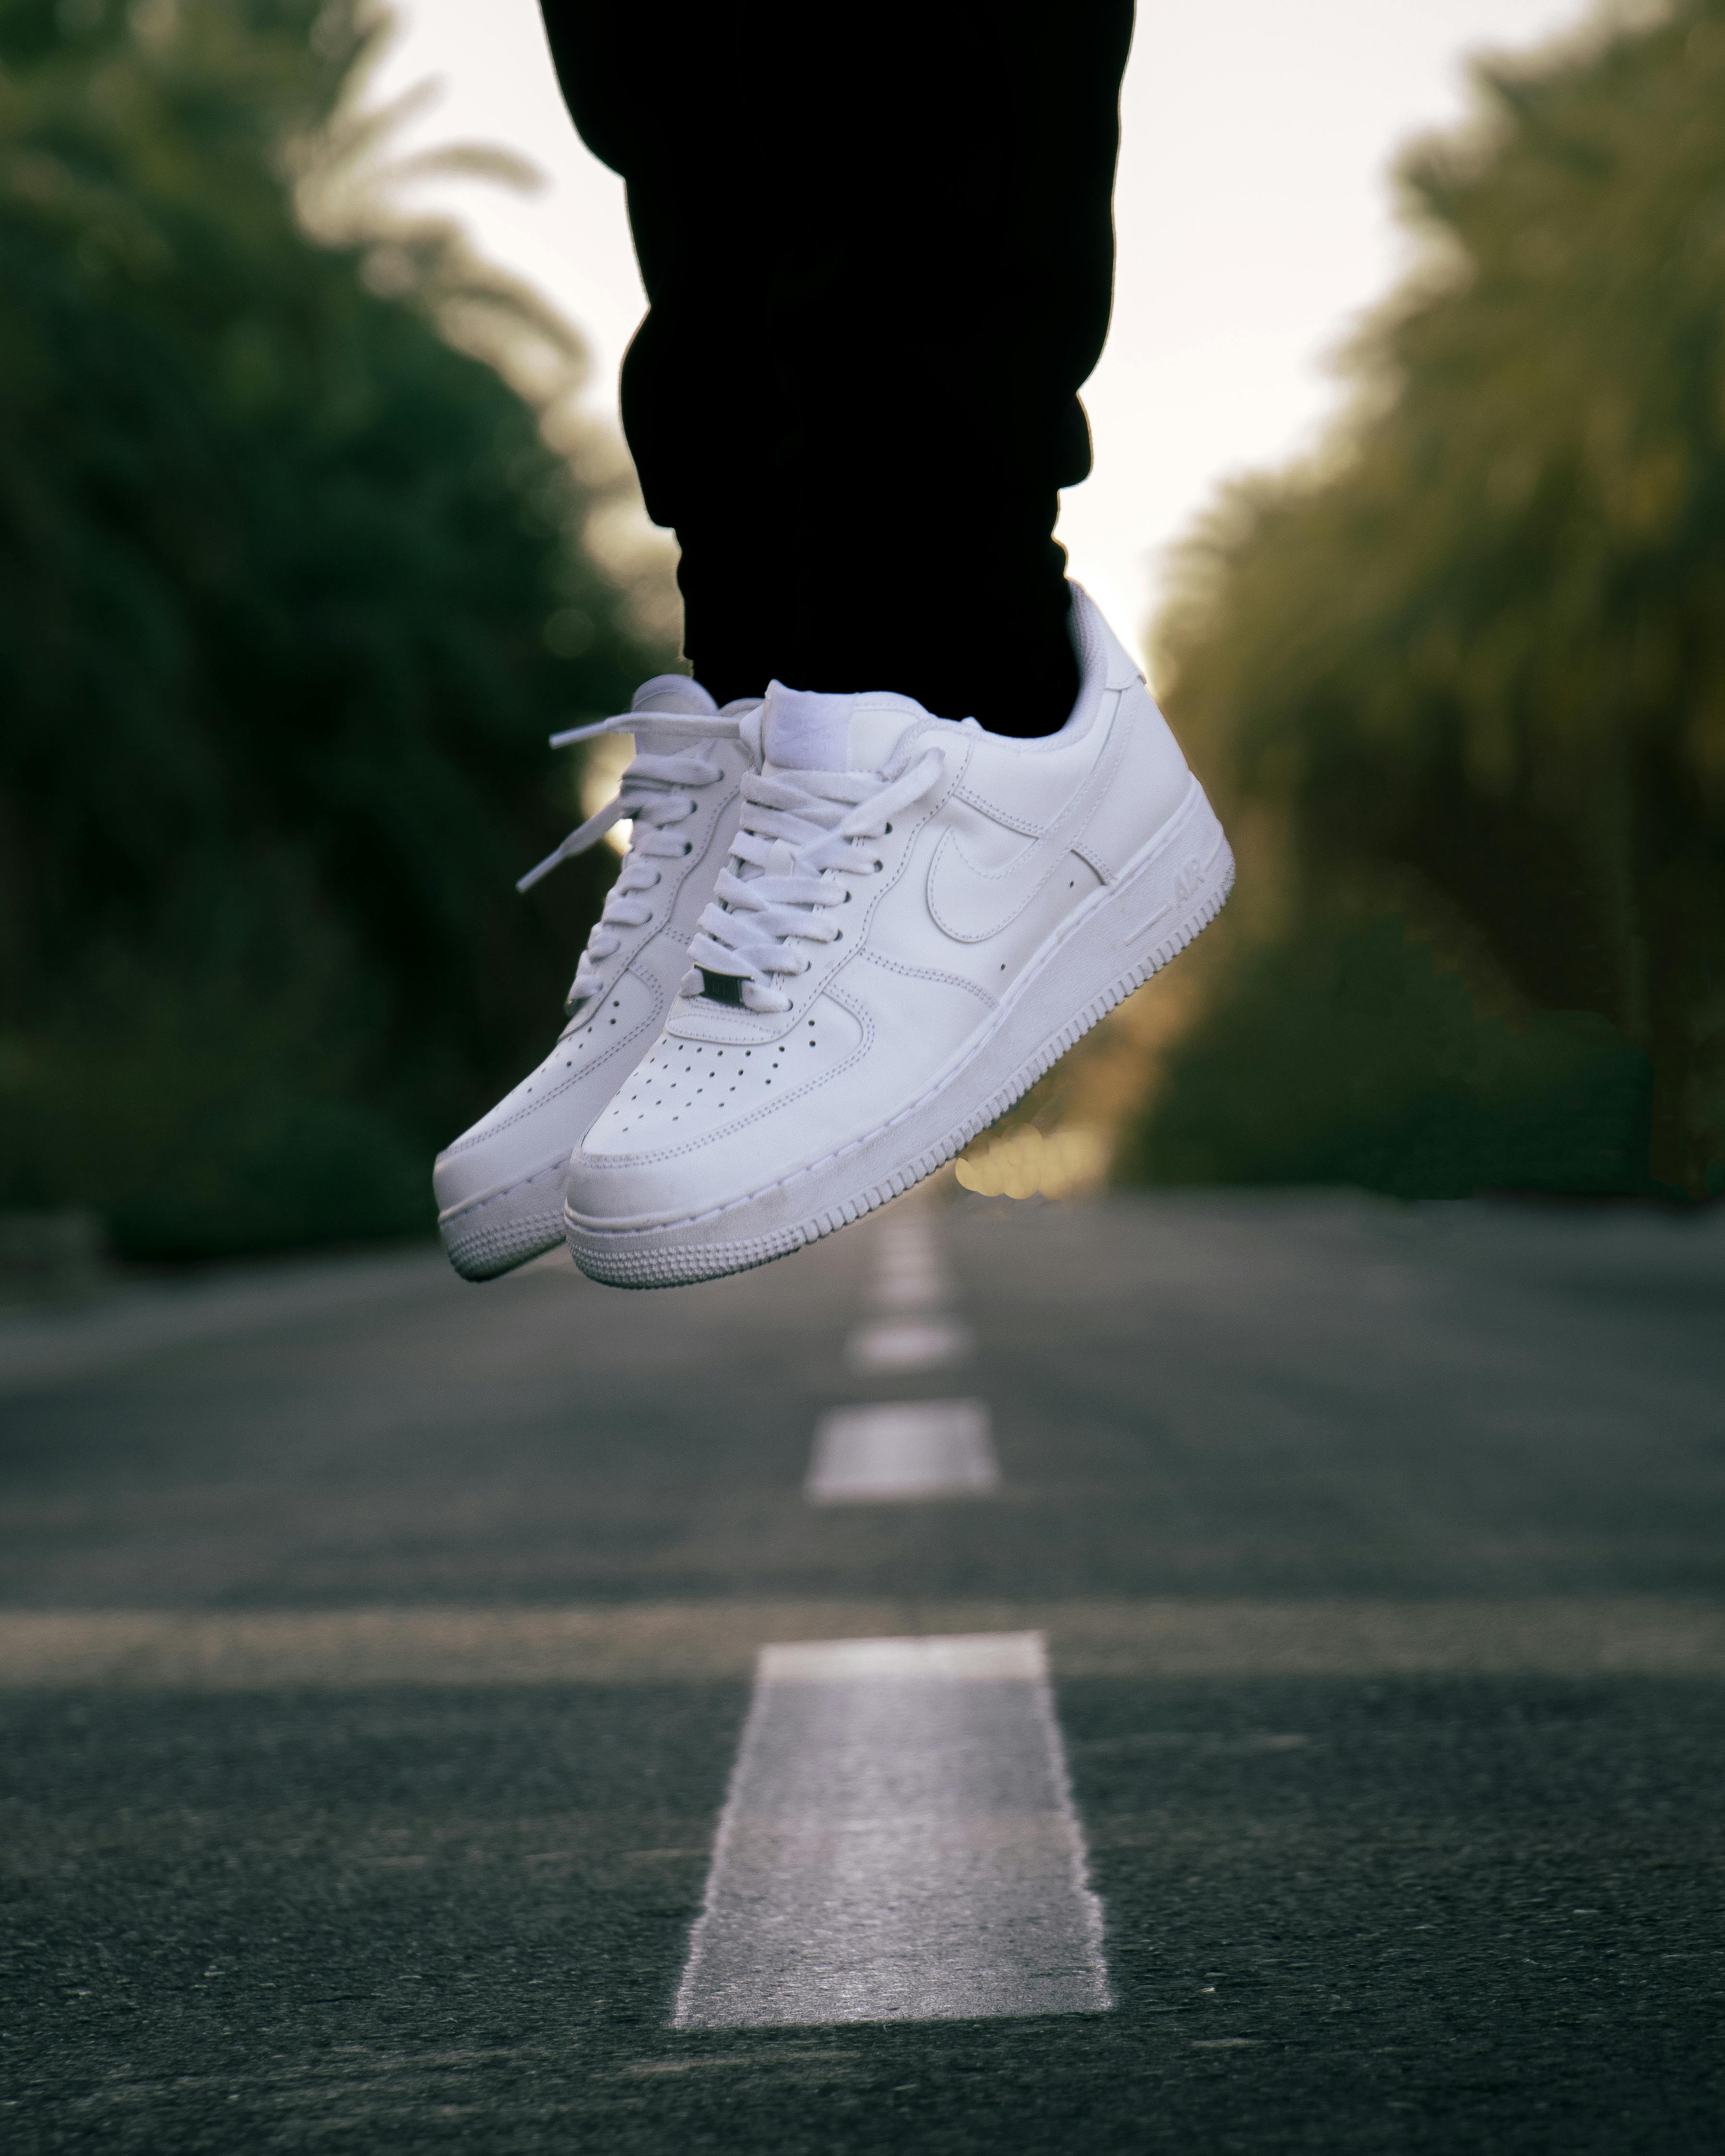 person wearing white sneakers